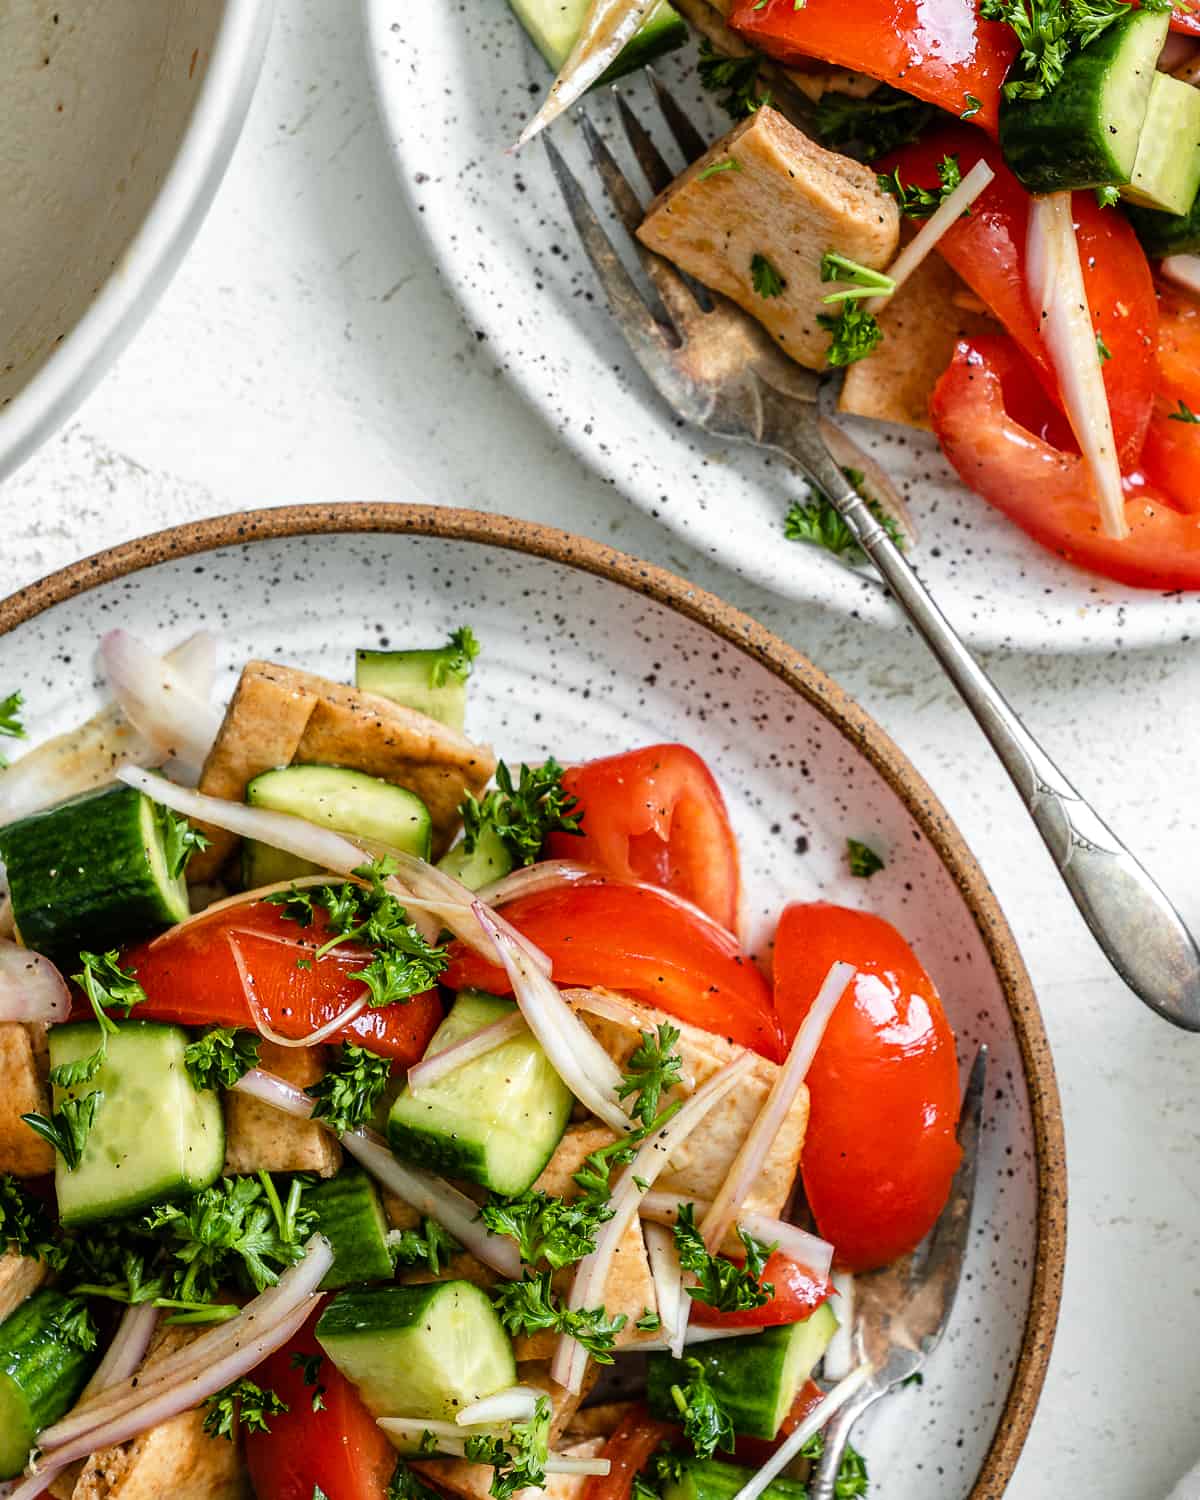 Ready panzanella salad on two plates in front of a white surface